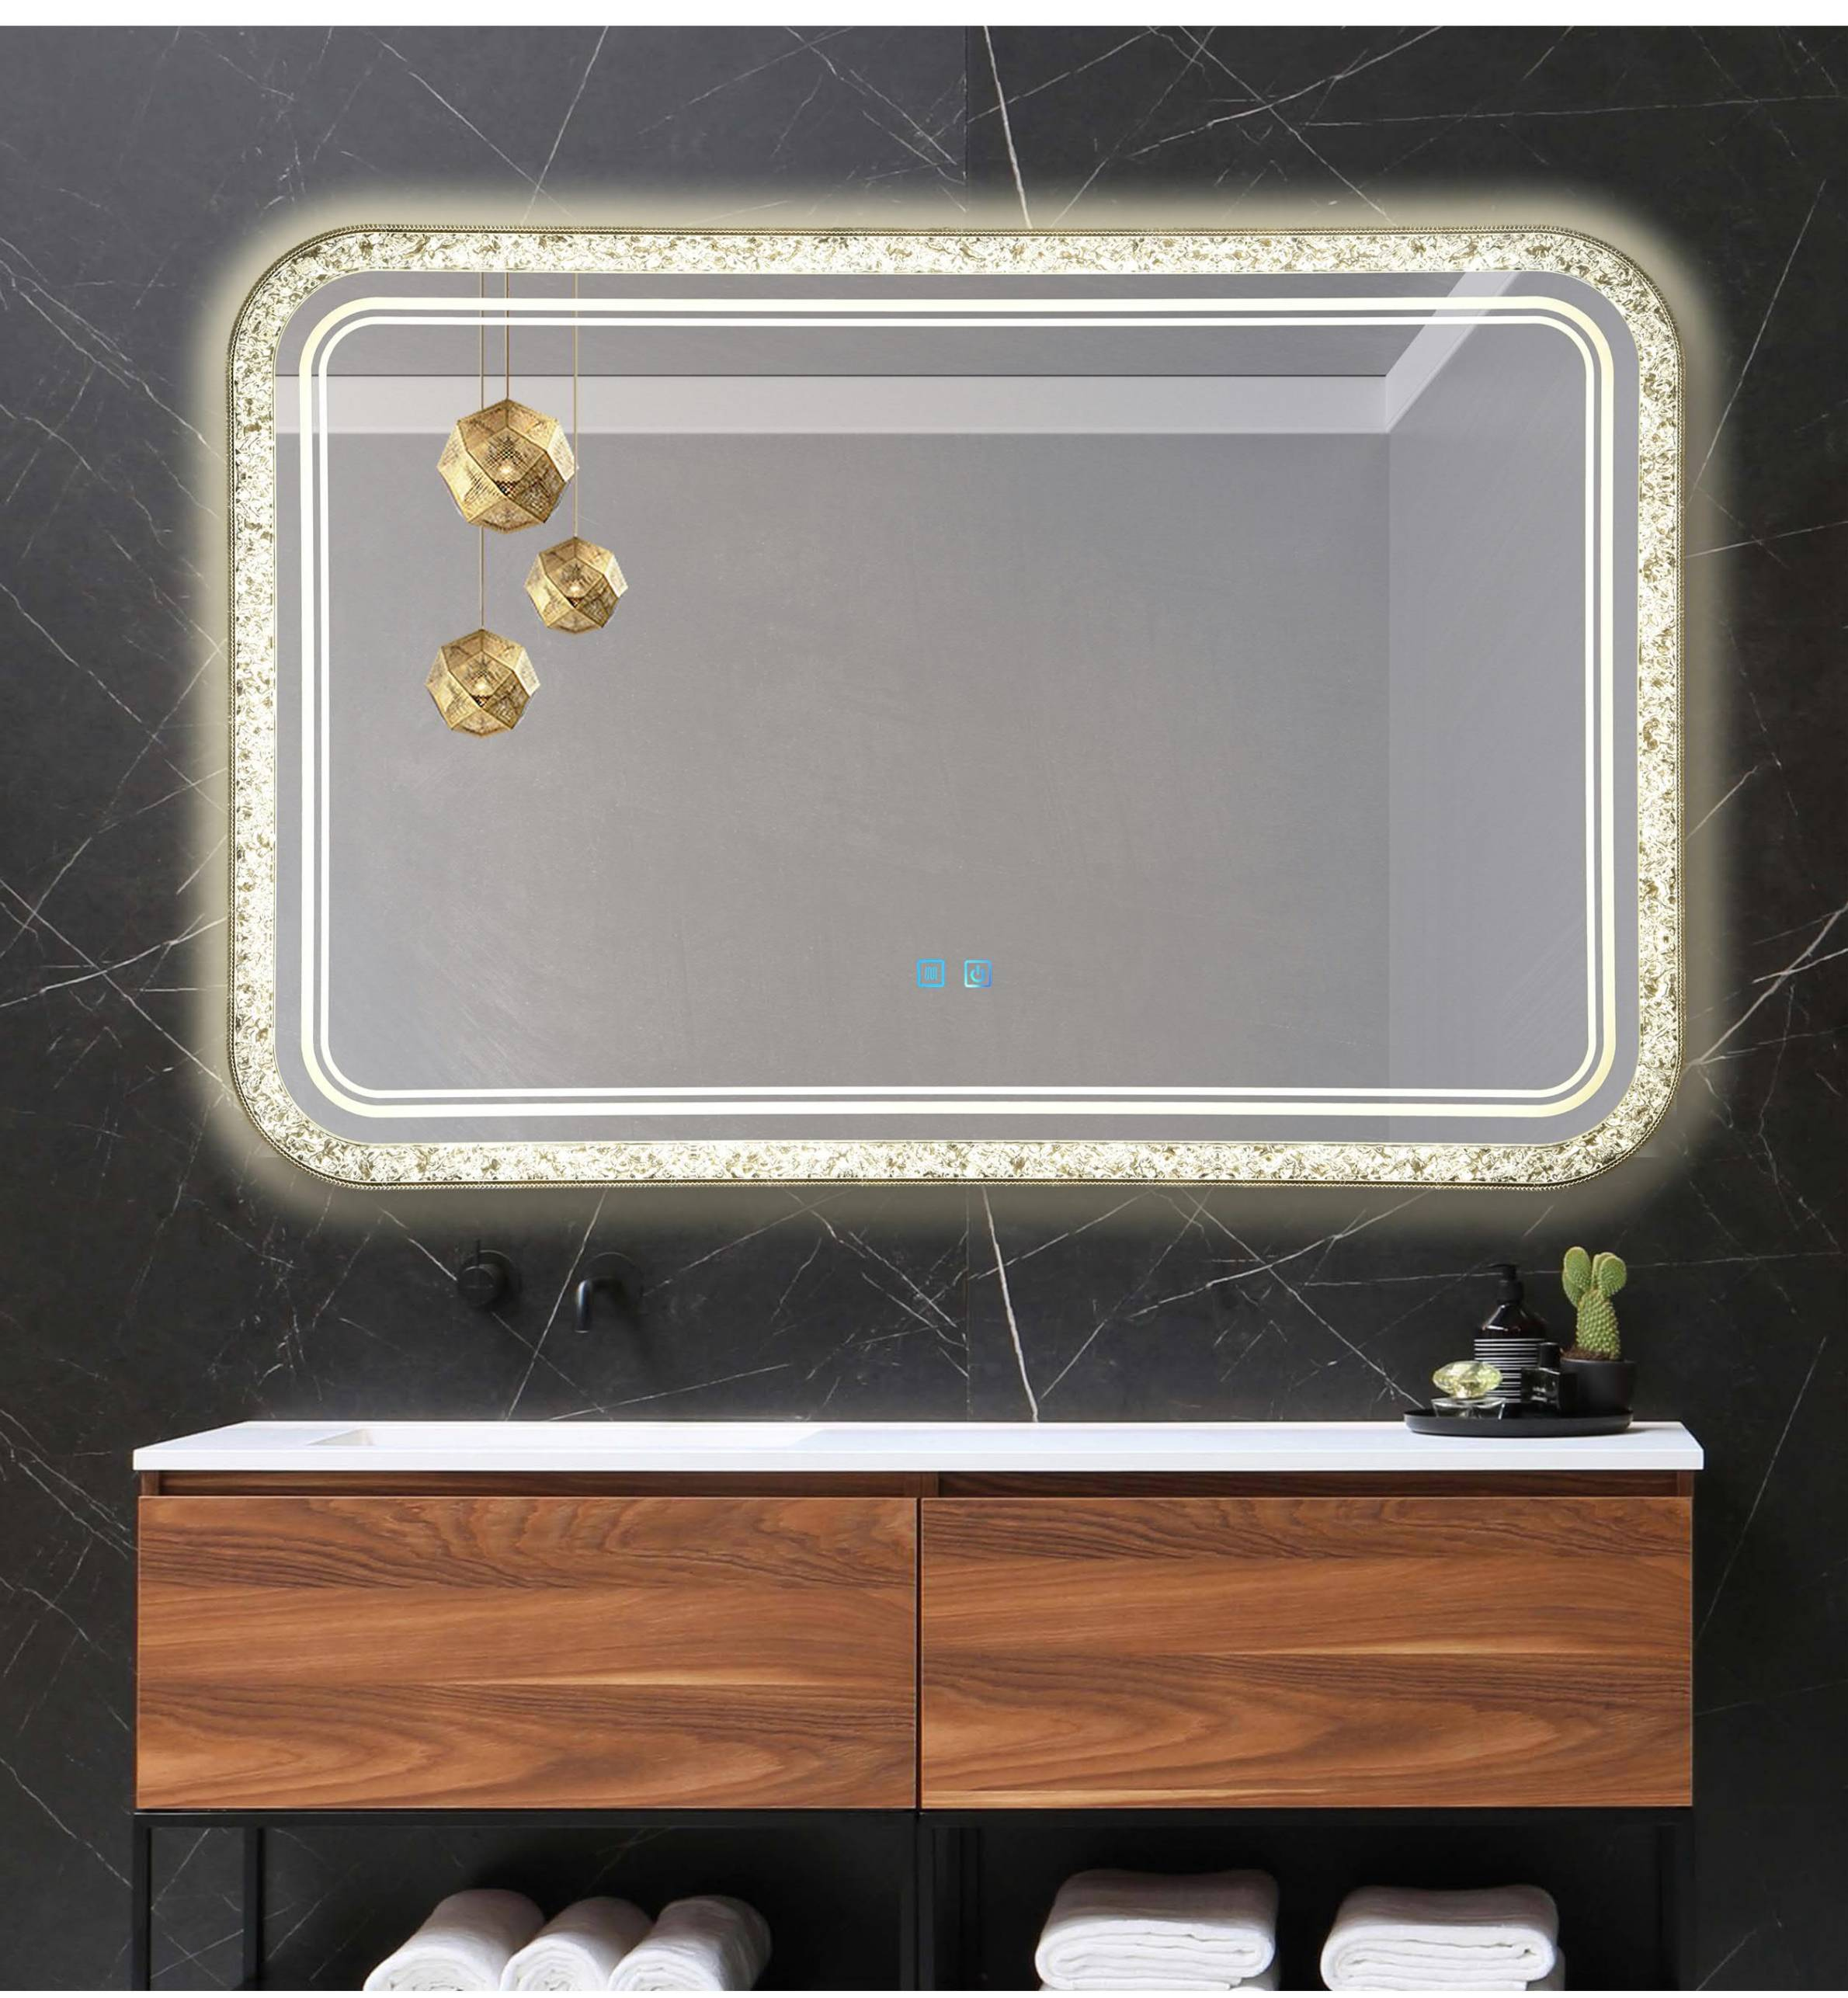 Zhuotai LED Lighted Bathroom Mirrors, Acrylic Frame Wall Mounted White Light Dimmable Anti-Fog Memory Button Waterproof CRI>90 5MM Copper Free Mirrors, Vertical & Horizontal